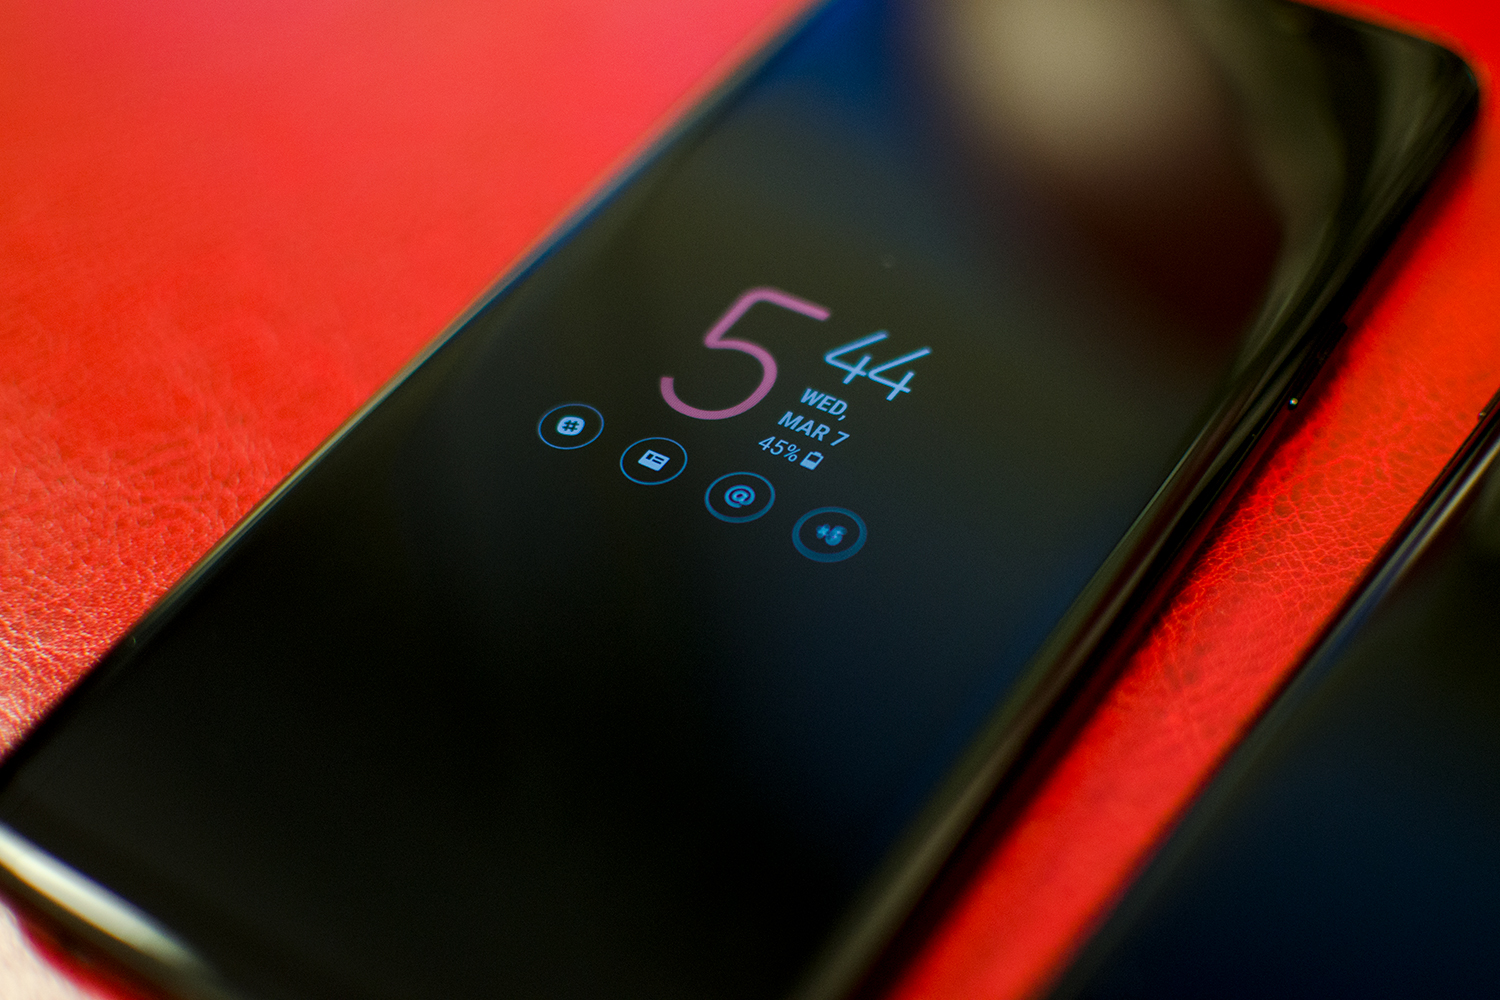 Samsung Galaxy S9 Plus review: The Galaxy S9 Plus is terrific, but wait a  month until after the Galaxy S10 arrives - CNET